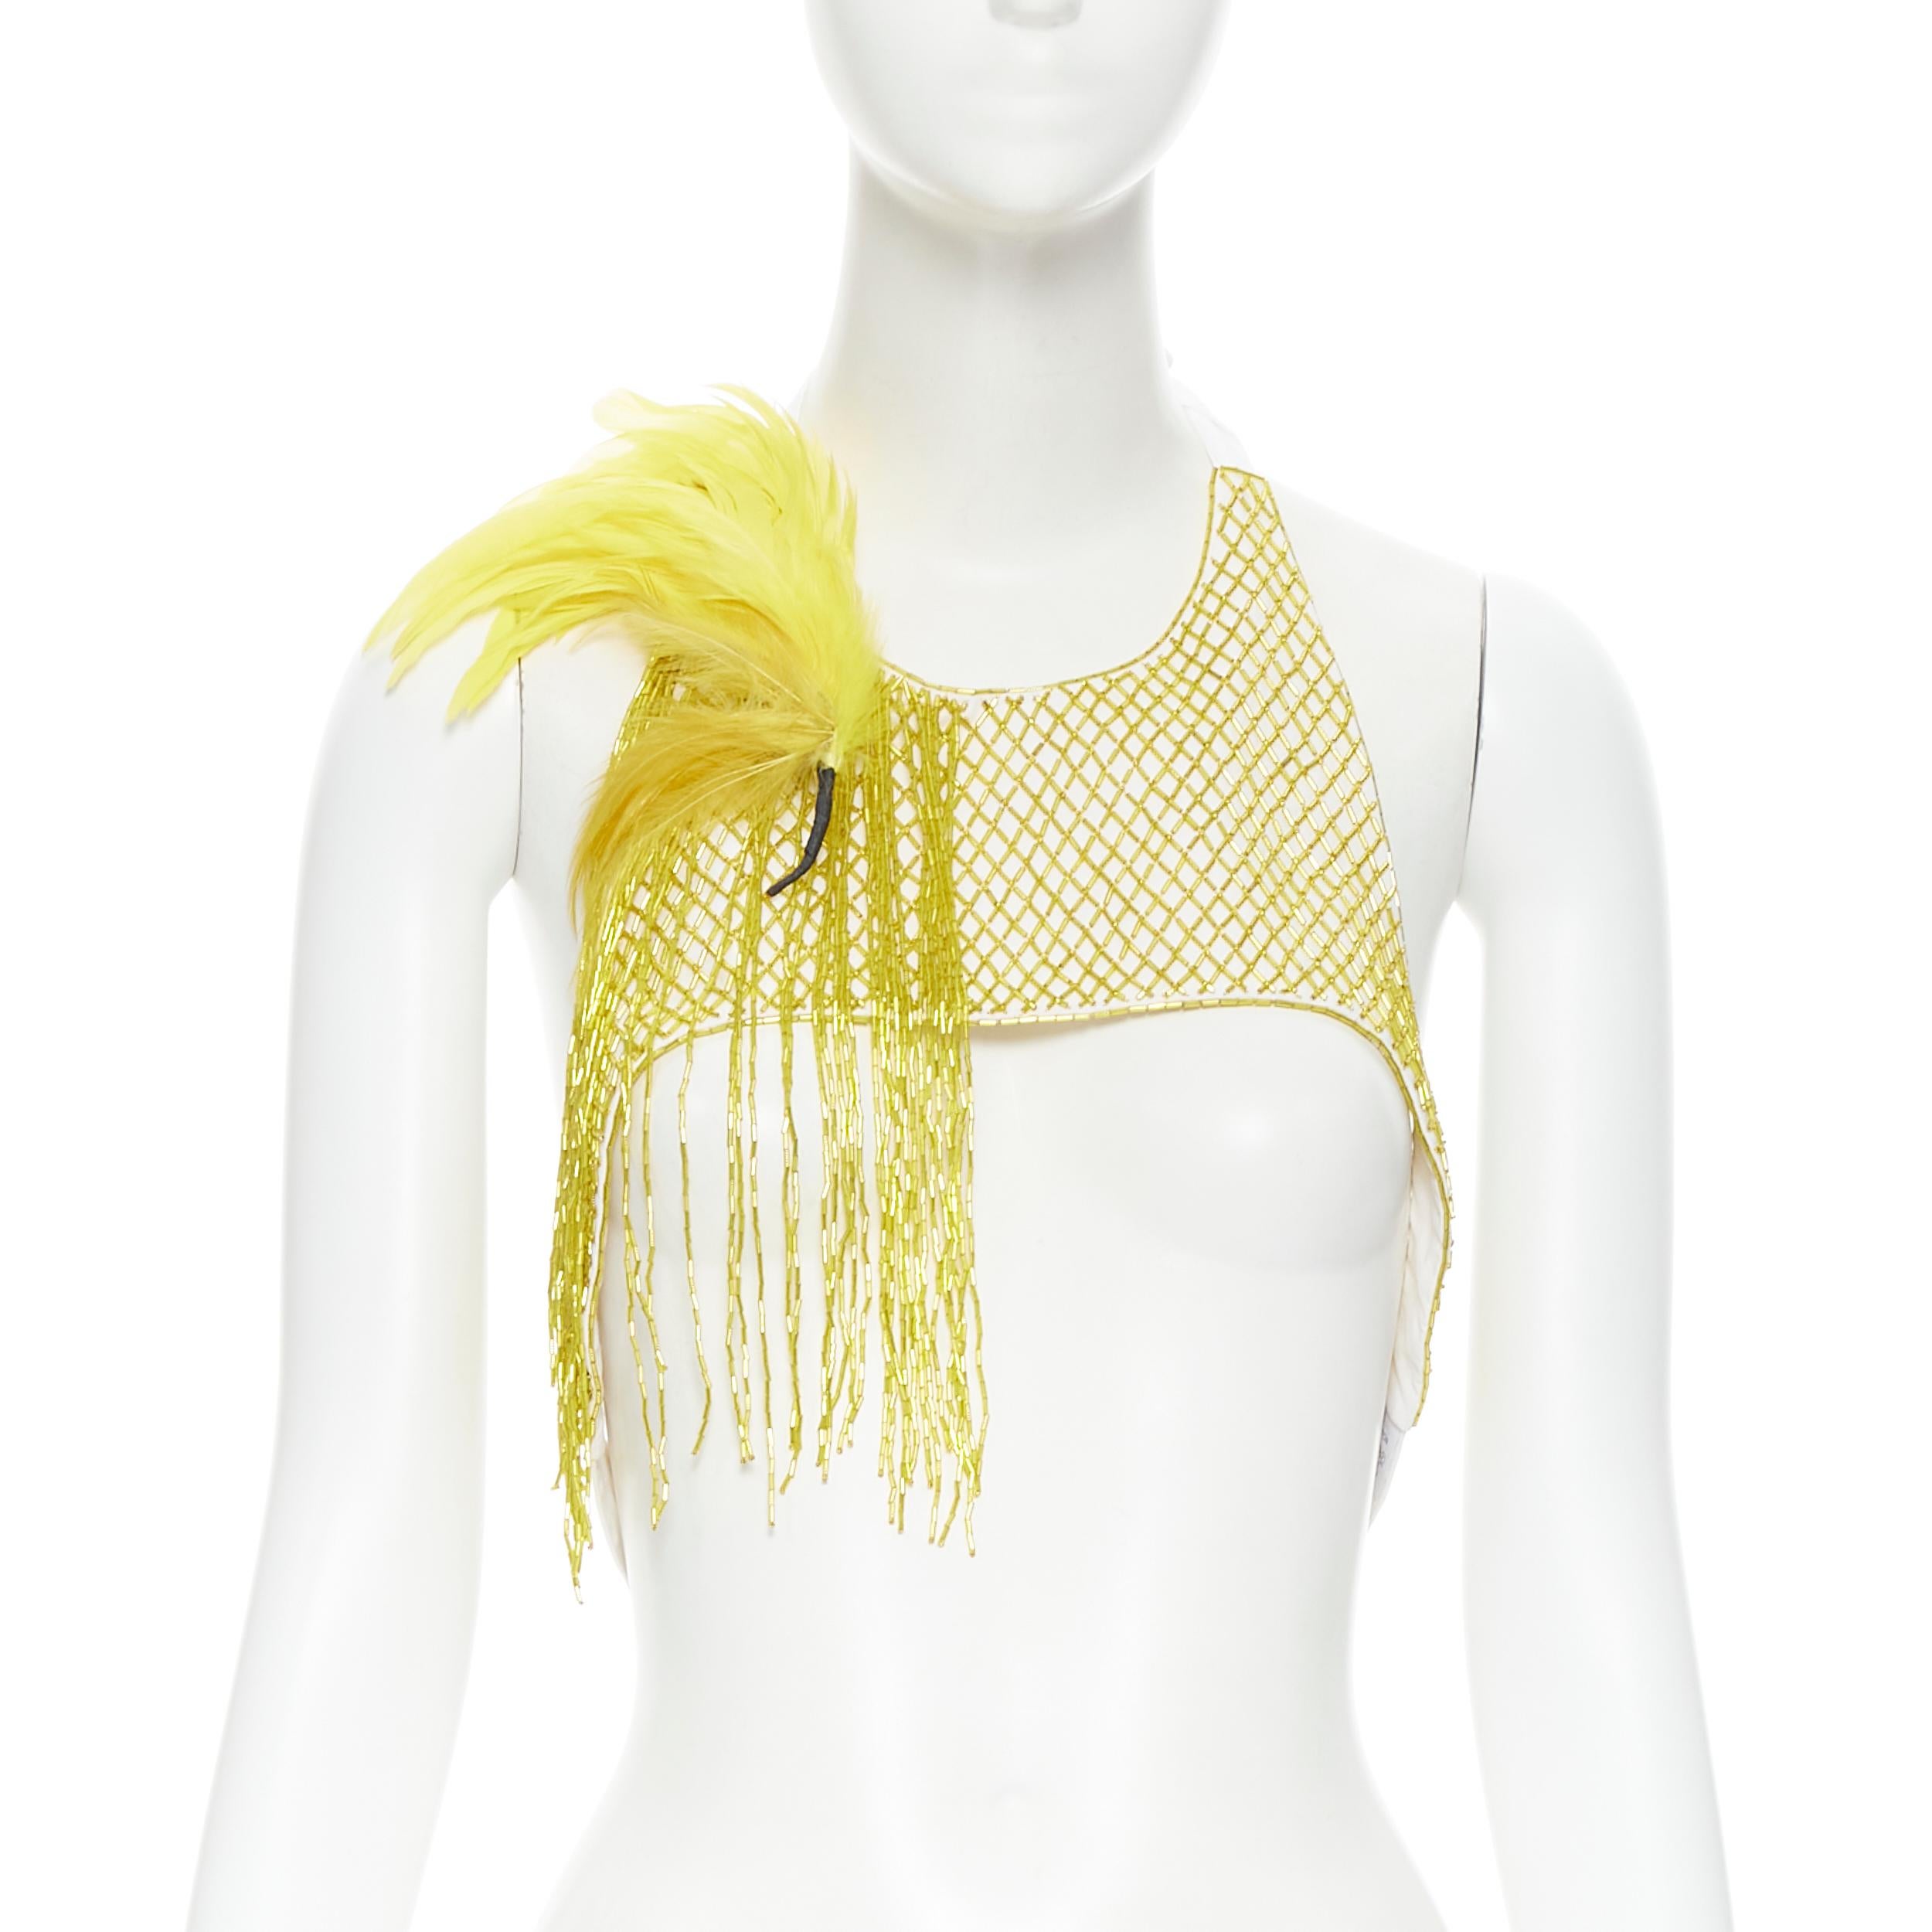 new DRIES VAN NOTEN 2019 runway yellow beaded feather harness top FR36 S 
Reference: TGAS/B00954 
Brand: Dries Van Noten 
Designer: Dries Van Noten 
Collection: Spring Summer 2019 Runway
Material: Cotton 
Color: Yellow 
Pattern: Solid 
Closure: